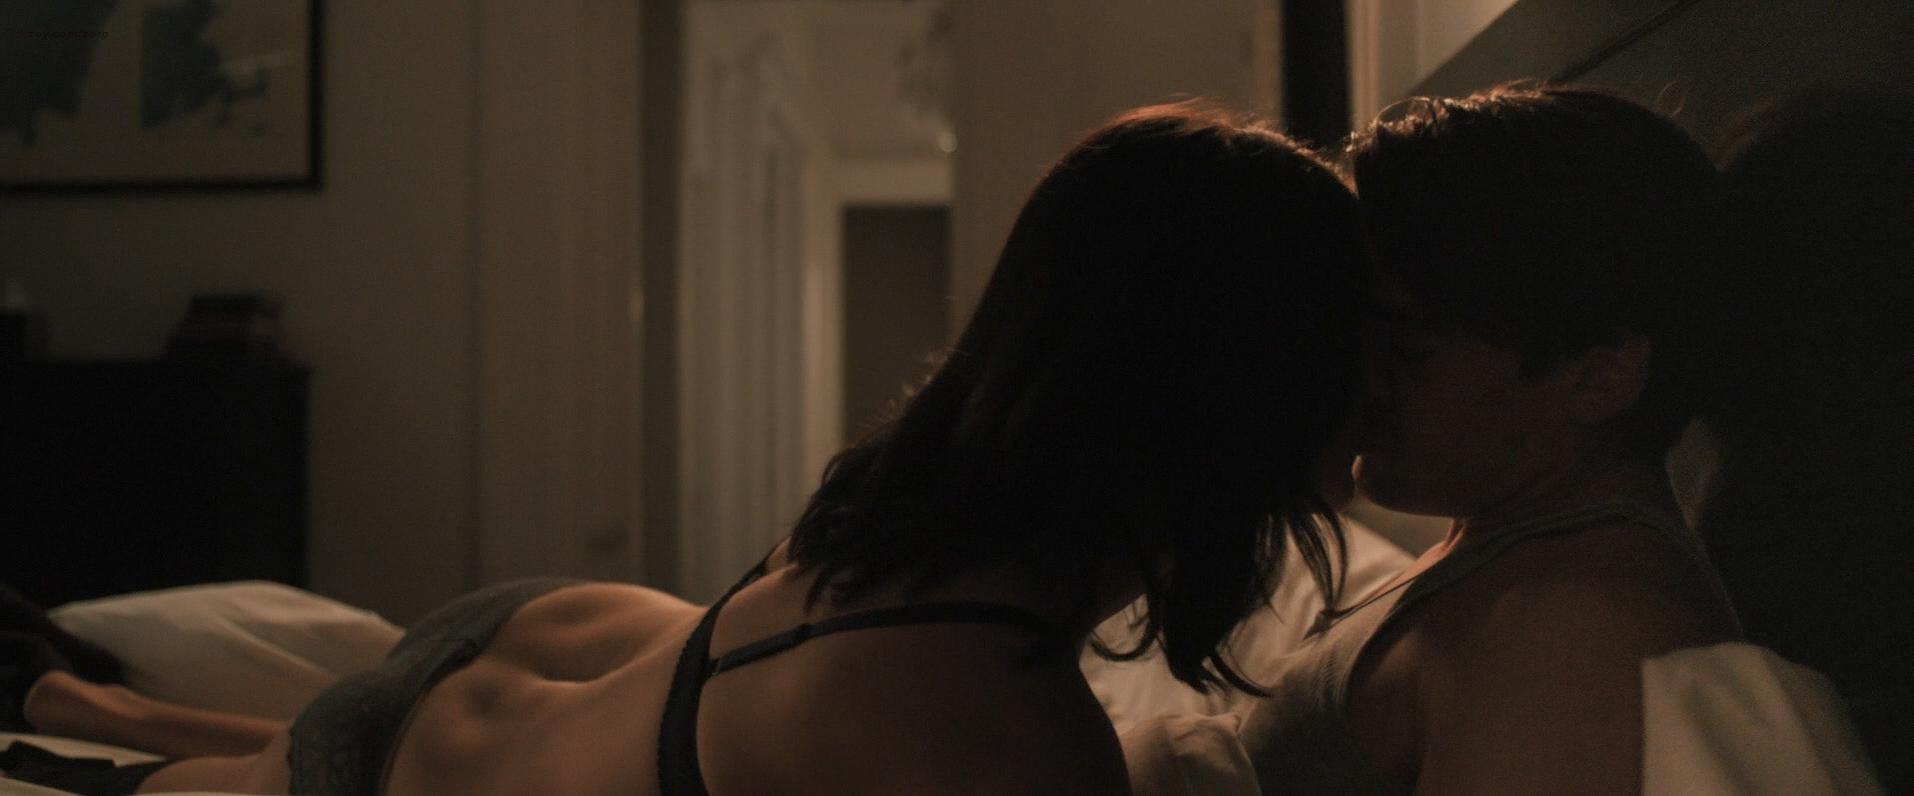 Nude Video Celebs Cobie Smulders Sexy The Intervention 2016